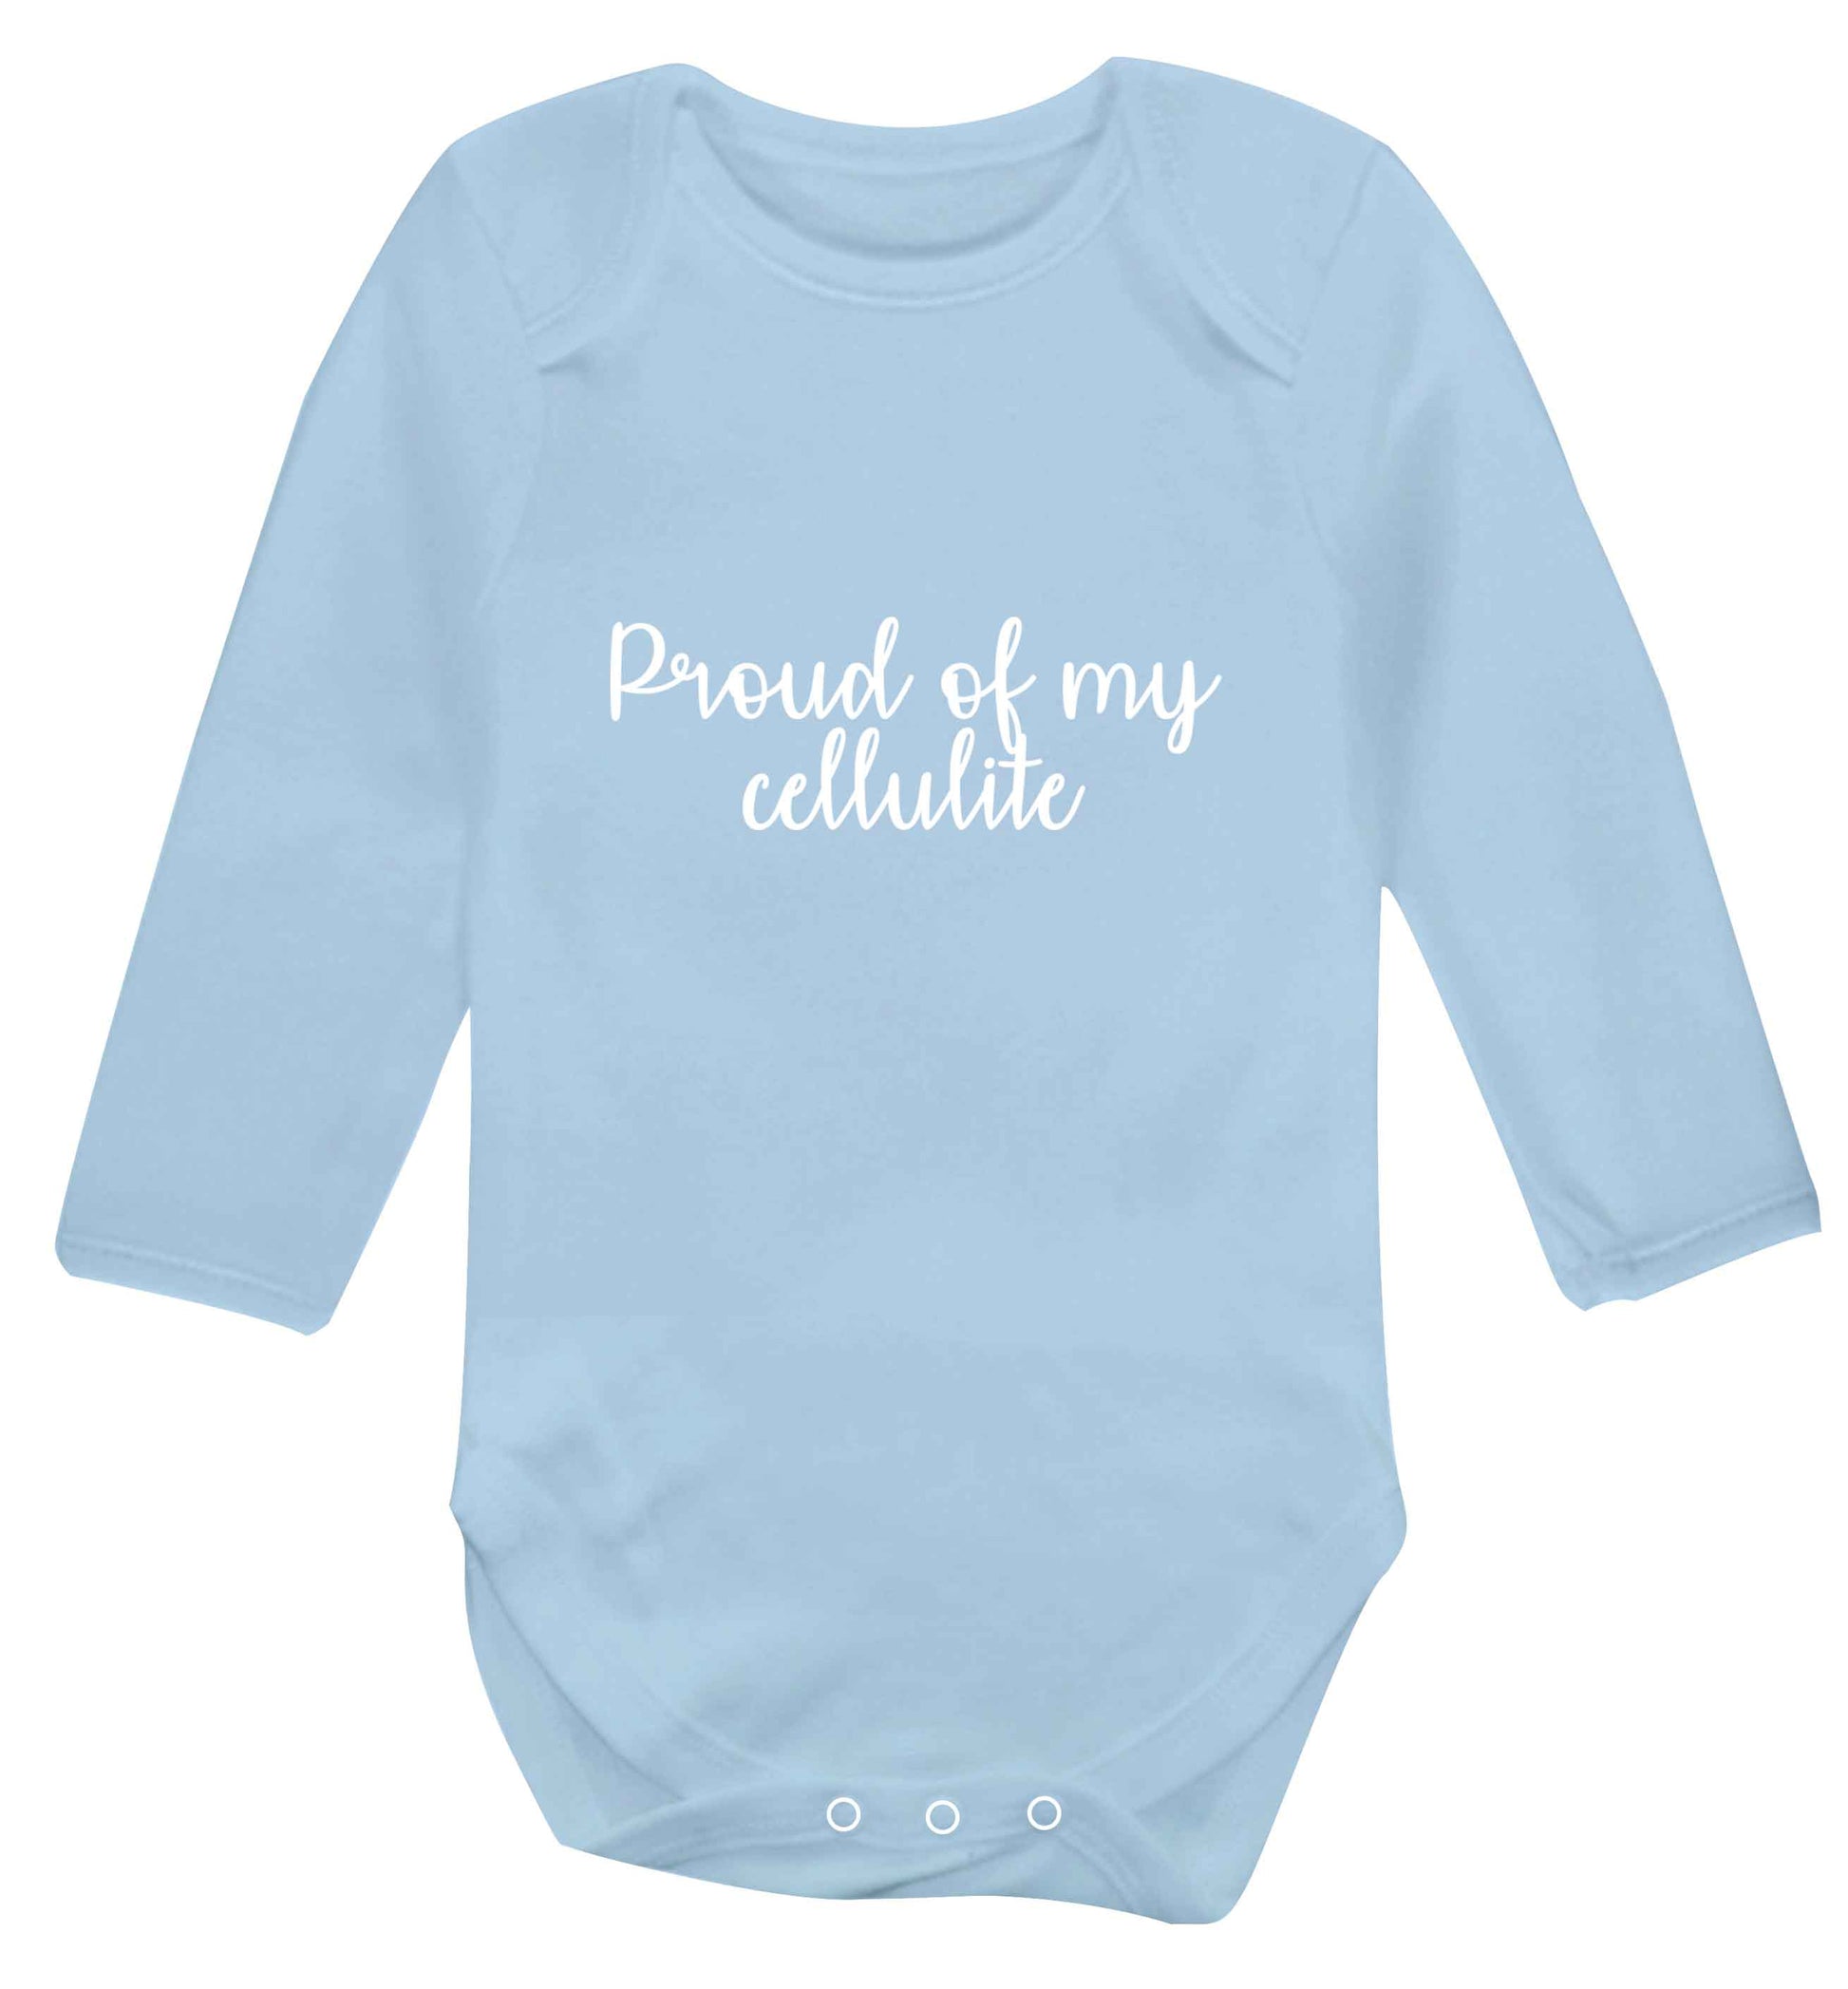 Proud of my cellulite baby vest long sleeved pale blue 6-12 months